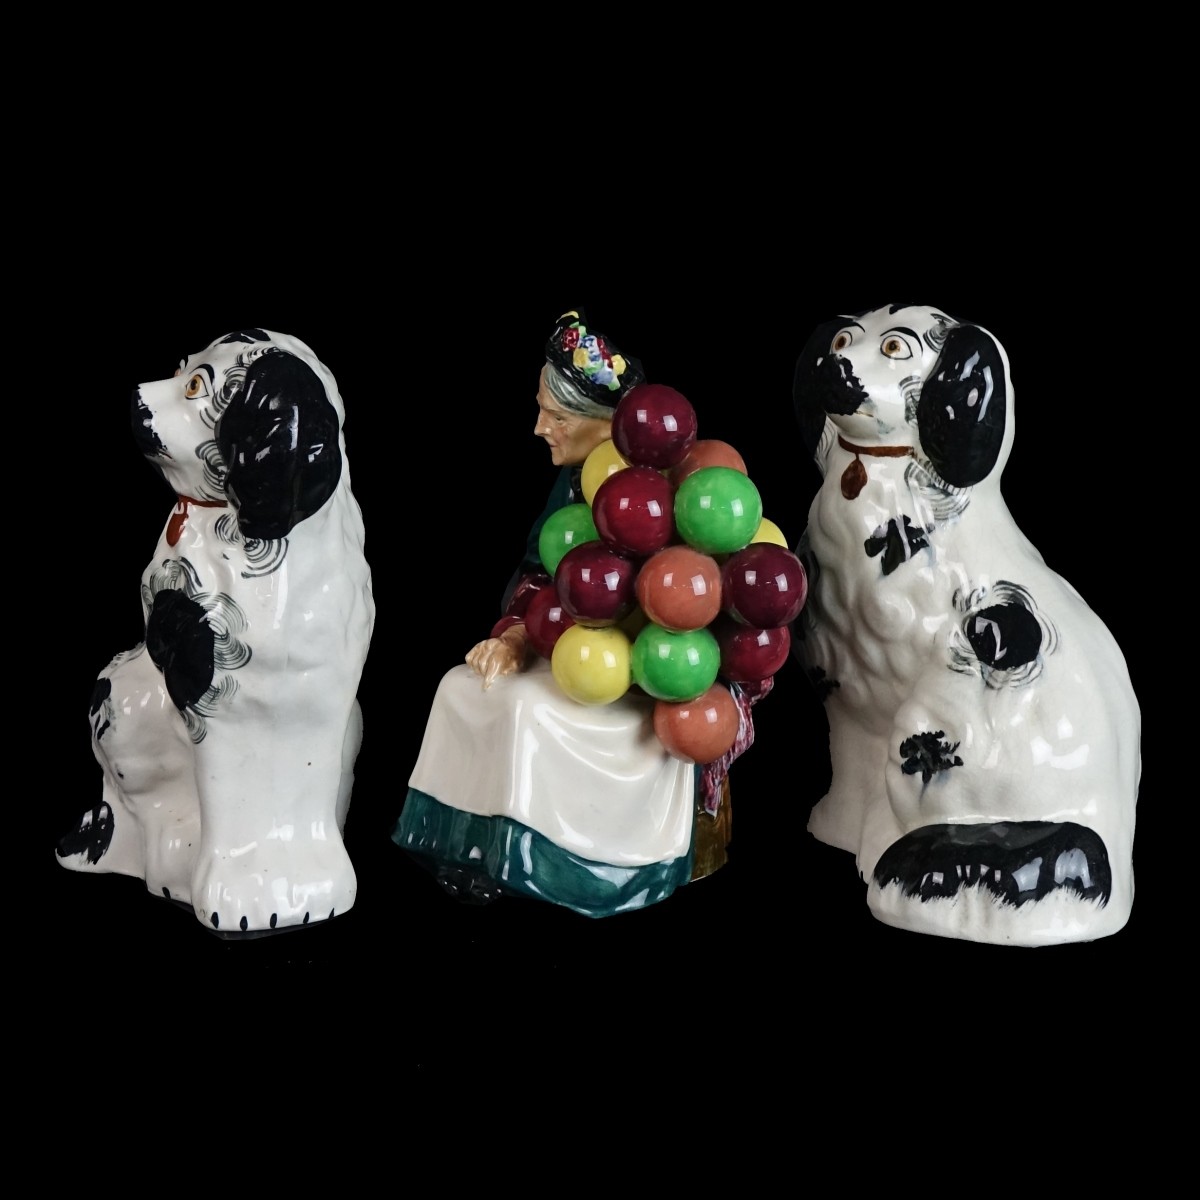 Royal Doulton and Staffordshire Figures